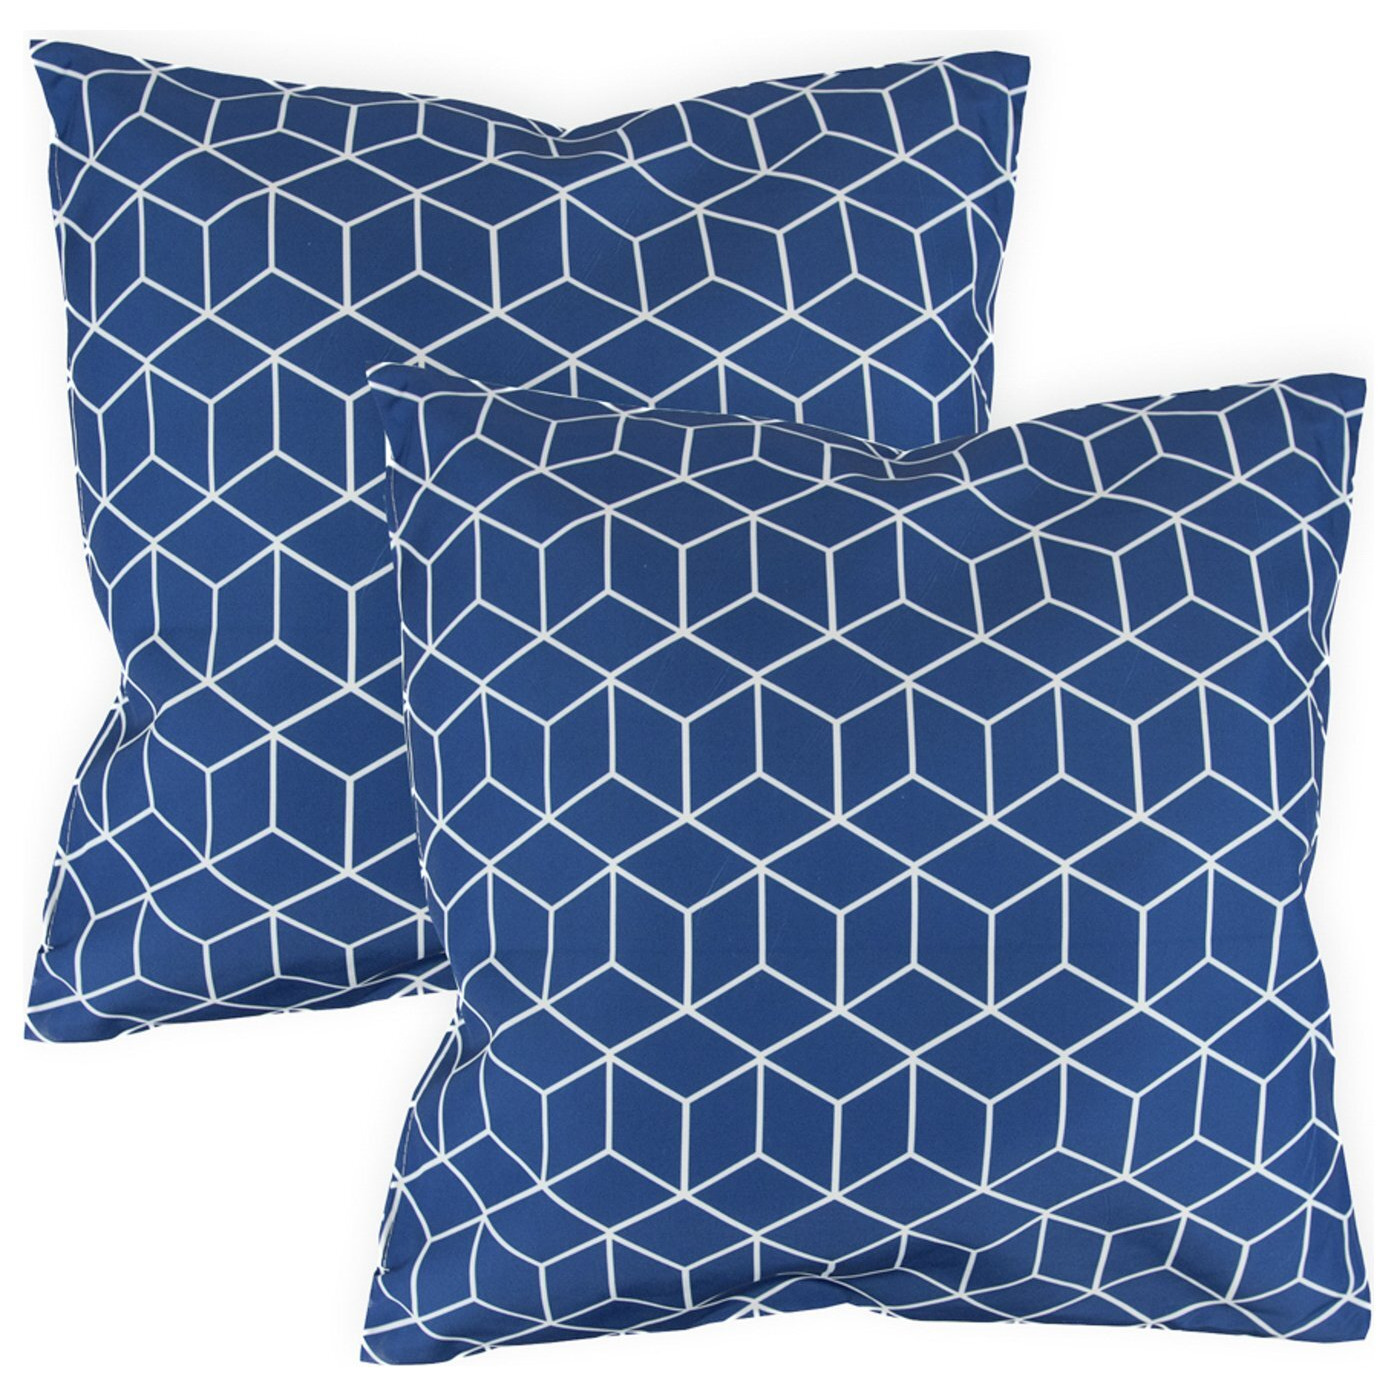 Streetwize Cube Blue Outdoor Cushions - Pack of 4 - image 1